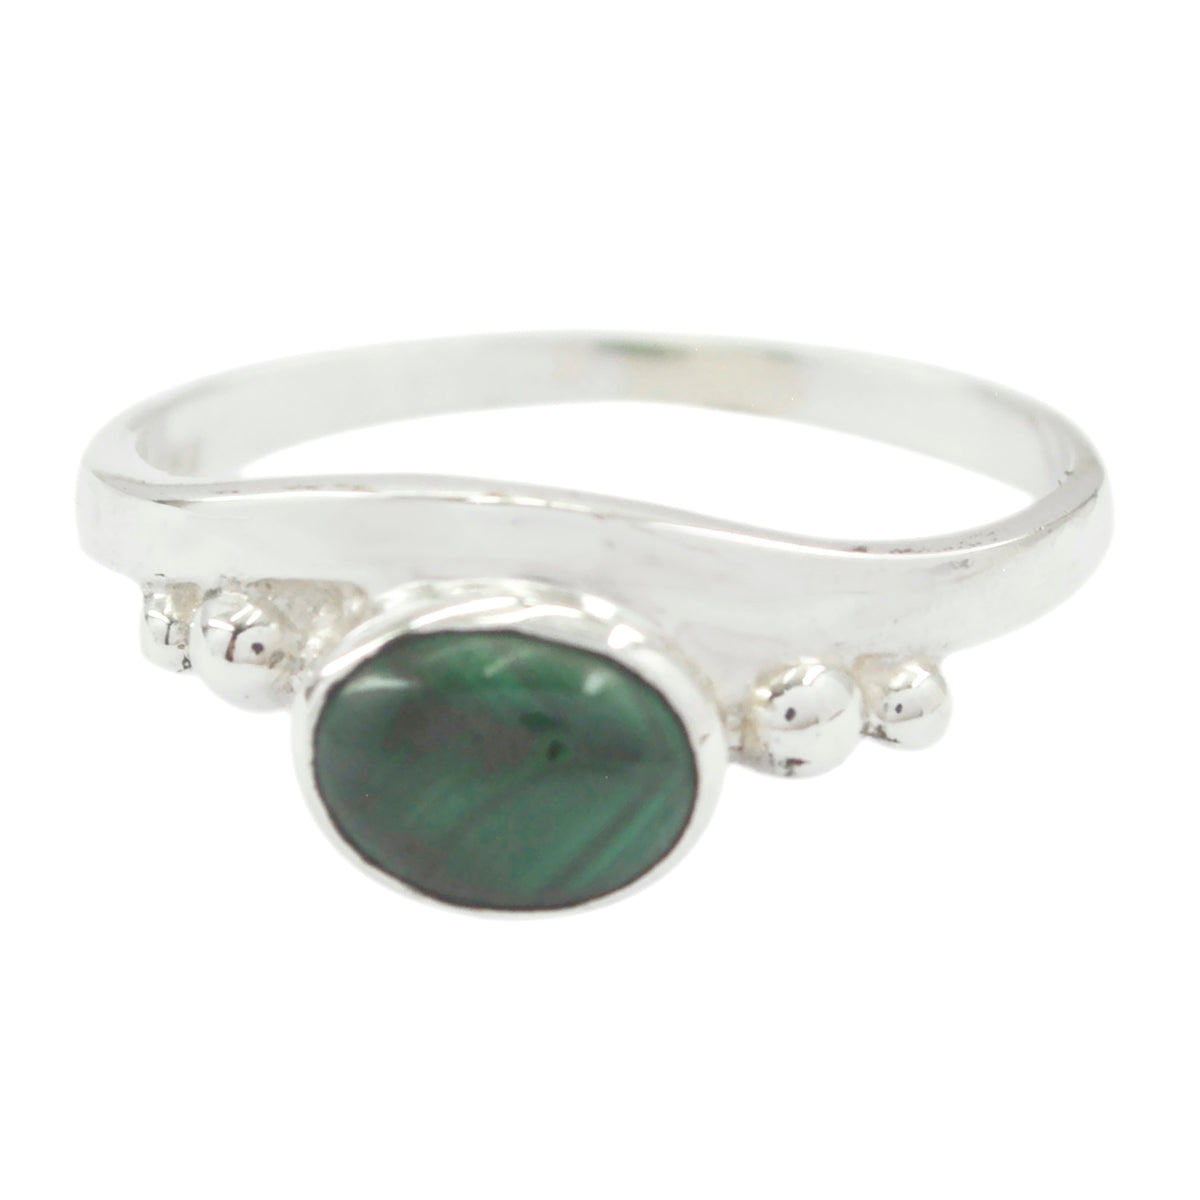 Appealing Gem Malachite 925 Silver Ring Wholesale Silver Jewelry